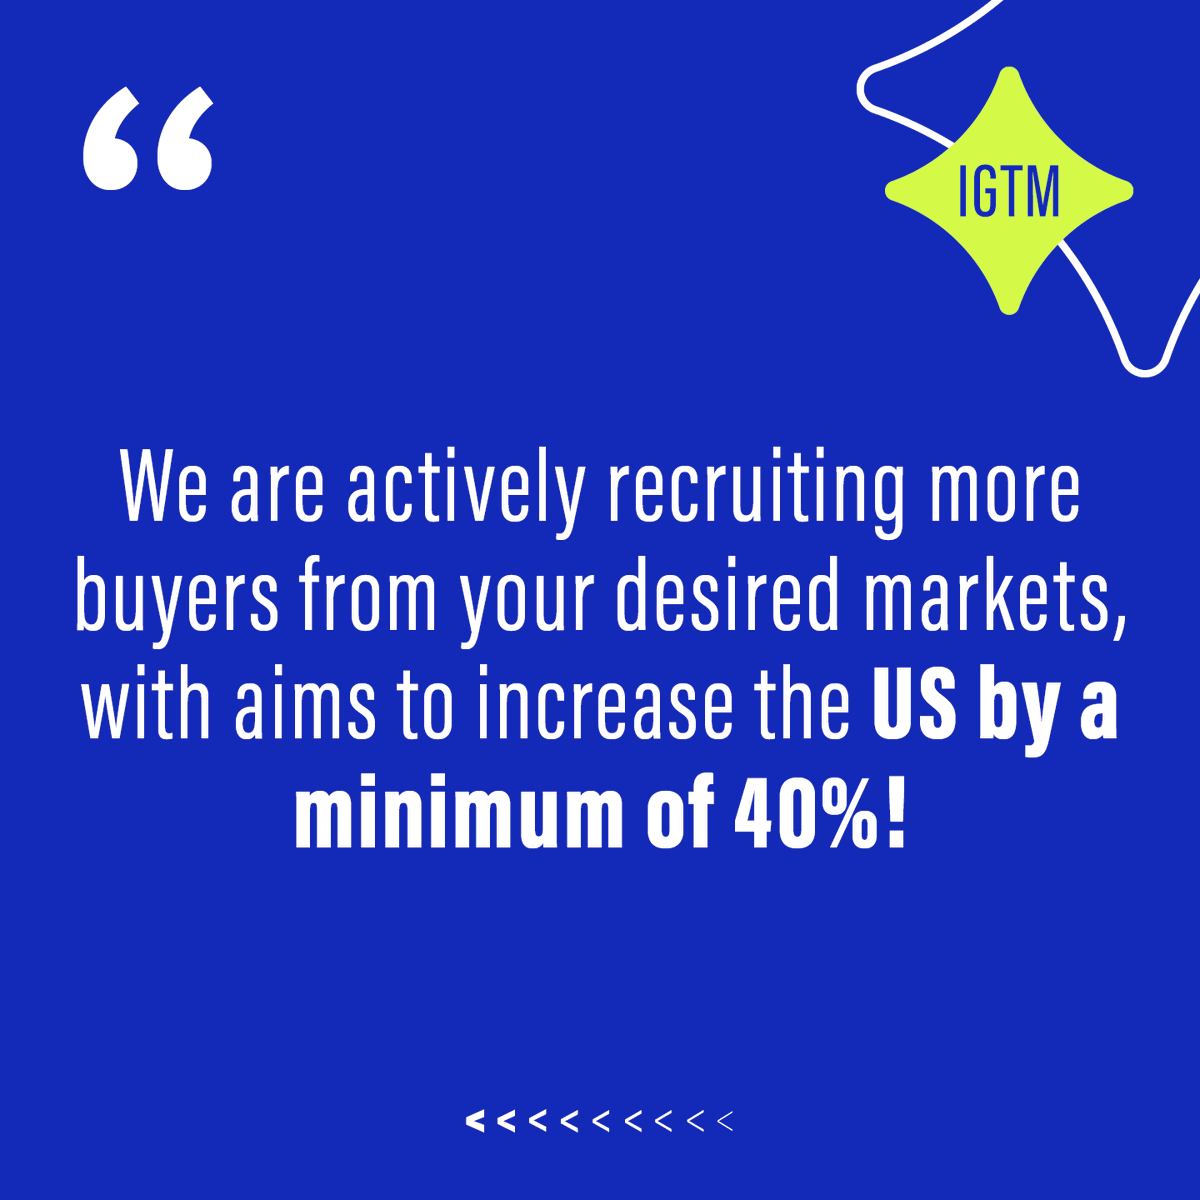 You showed great appreciation for the wide range of buyers, mentioning those from the US and Europe in particular. That’s why we’re actively recruiting more buyers from your desired markets, with aims to increase the US by a minimum of 40%! 🇺🇸 igtmarket.com